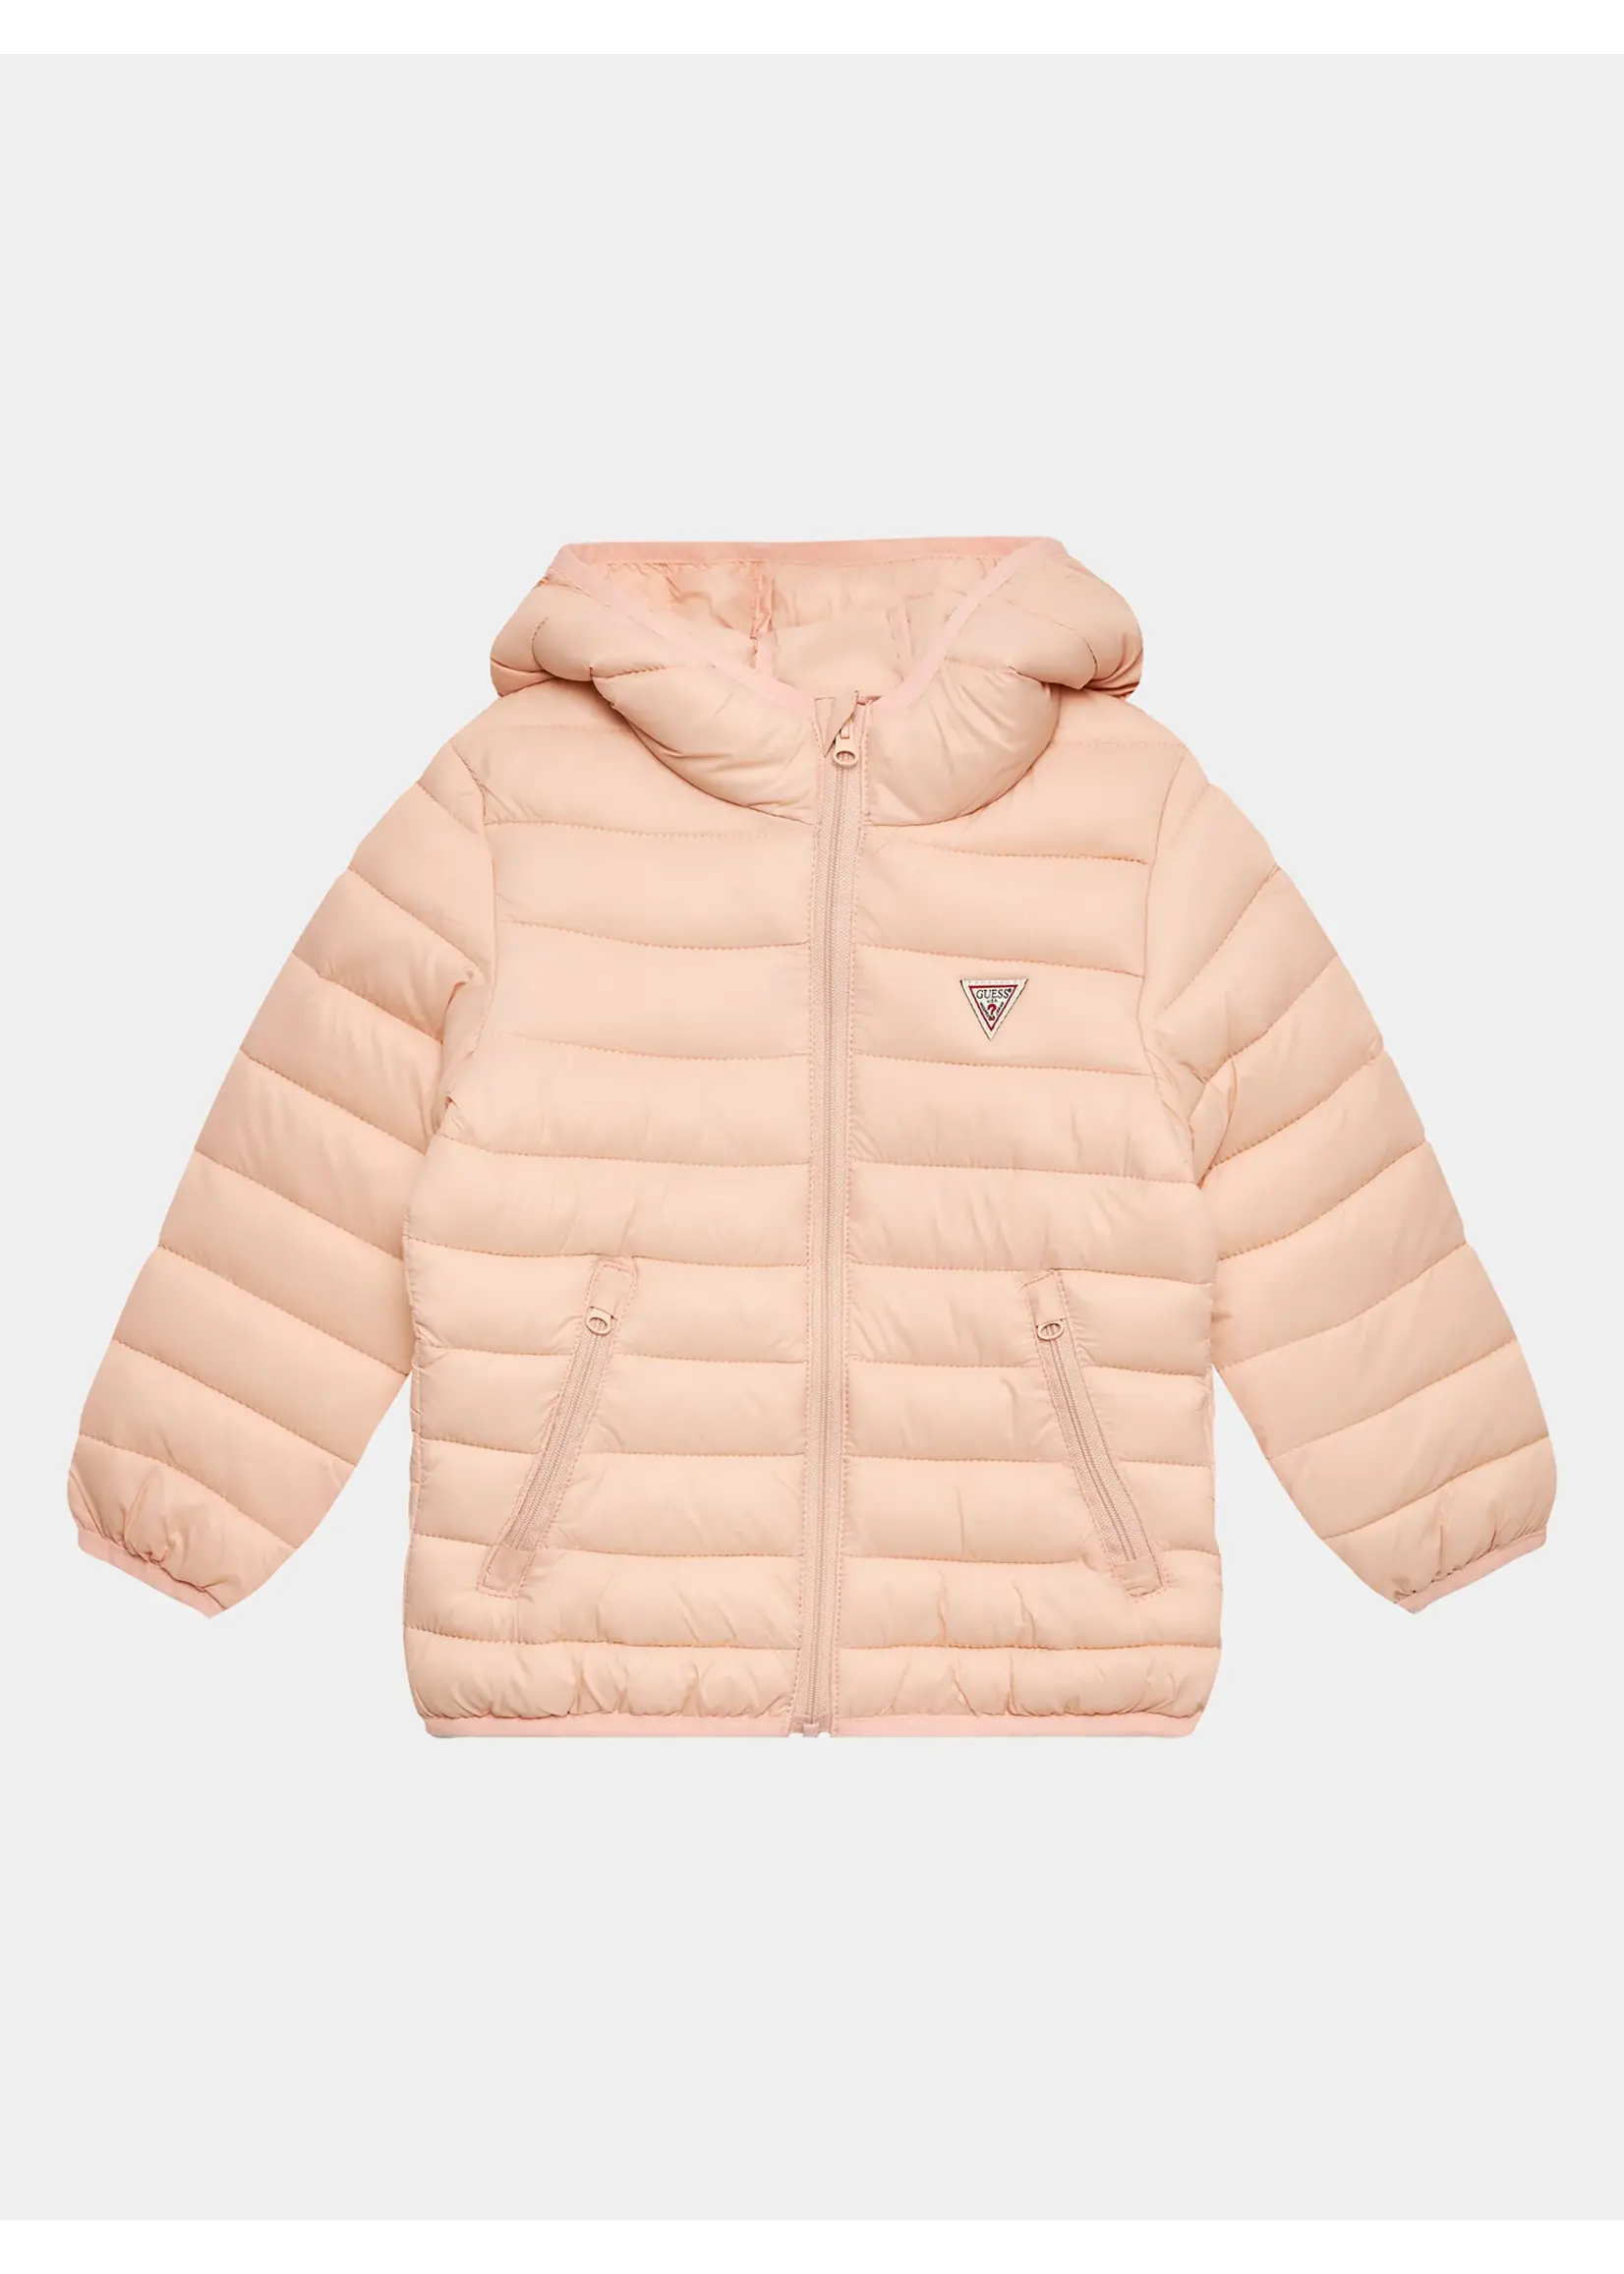 Guess UNISEX PADDED LS JACKET_CORE H93T00 SUMMER LIGHT PINK